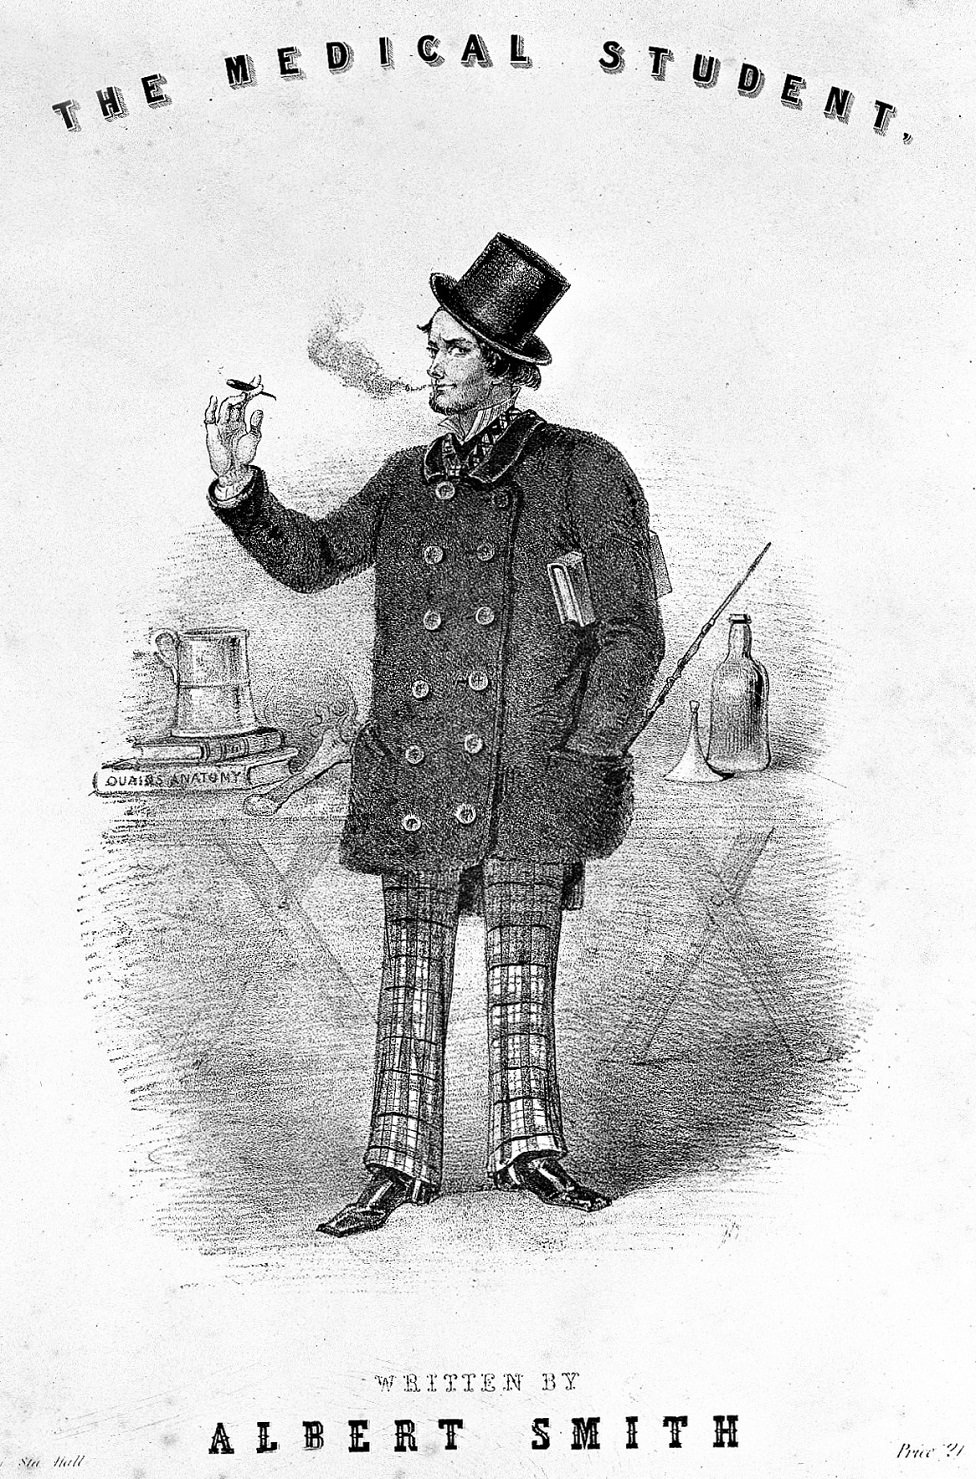 A medical student portrayed in the 19th century: smoking with a tankard and an anatomy book on the table